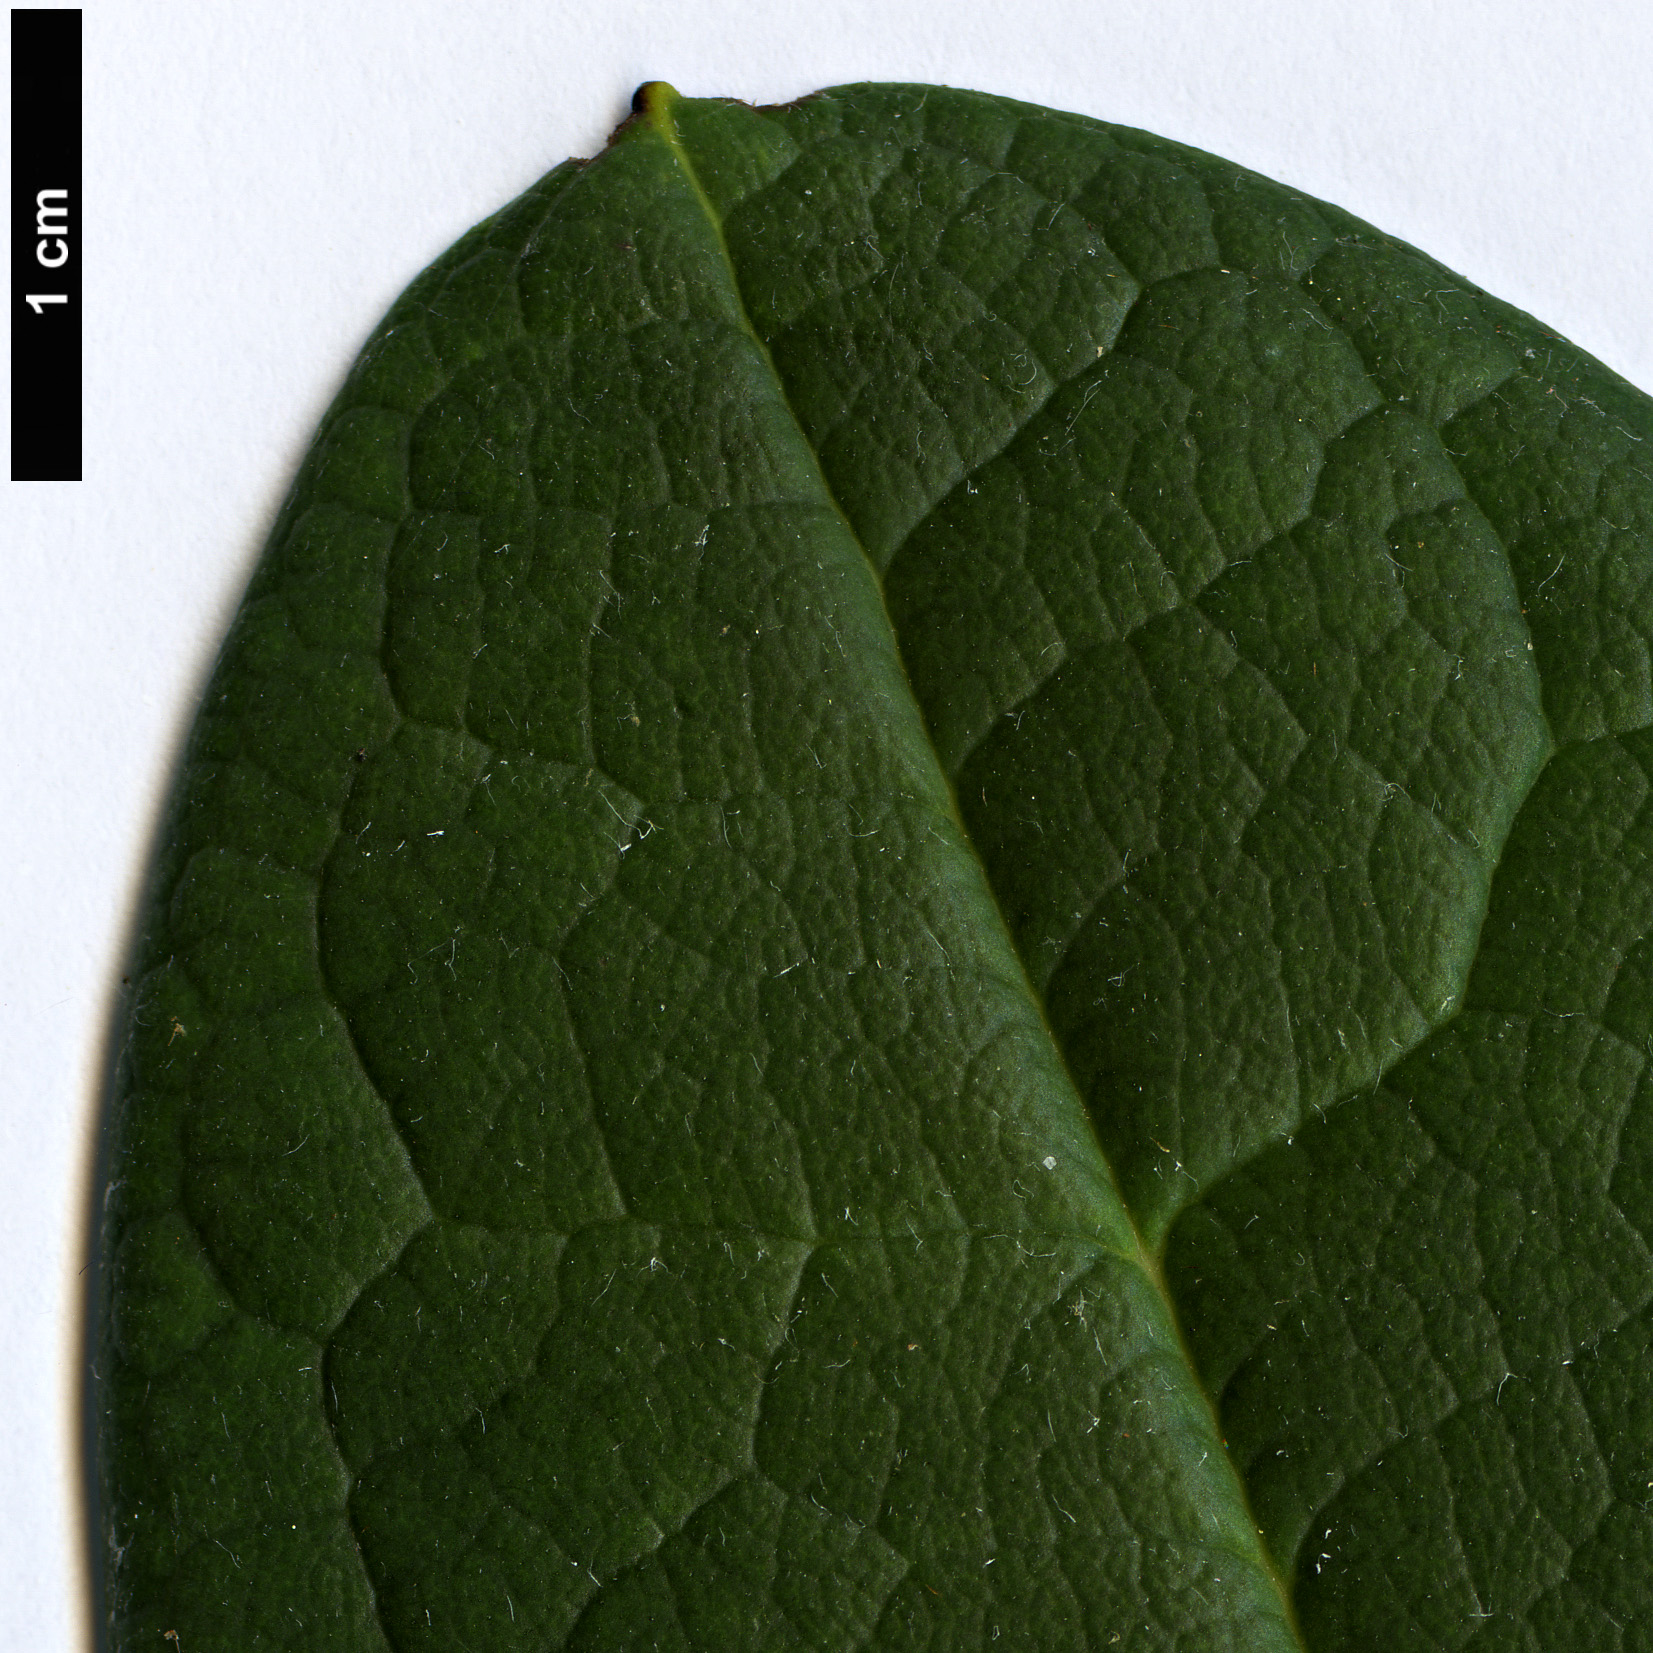 High resolution image: Family: Ericaceae - Genus: Rhododendron - Taxon: kesangiae